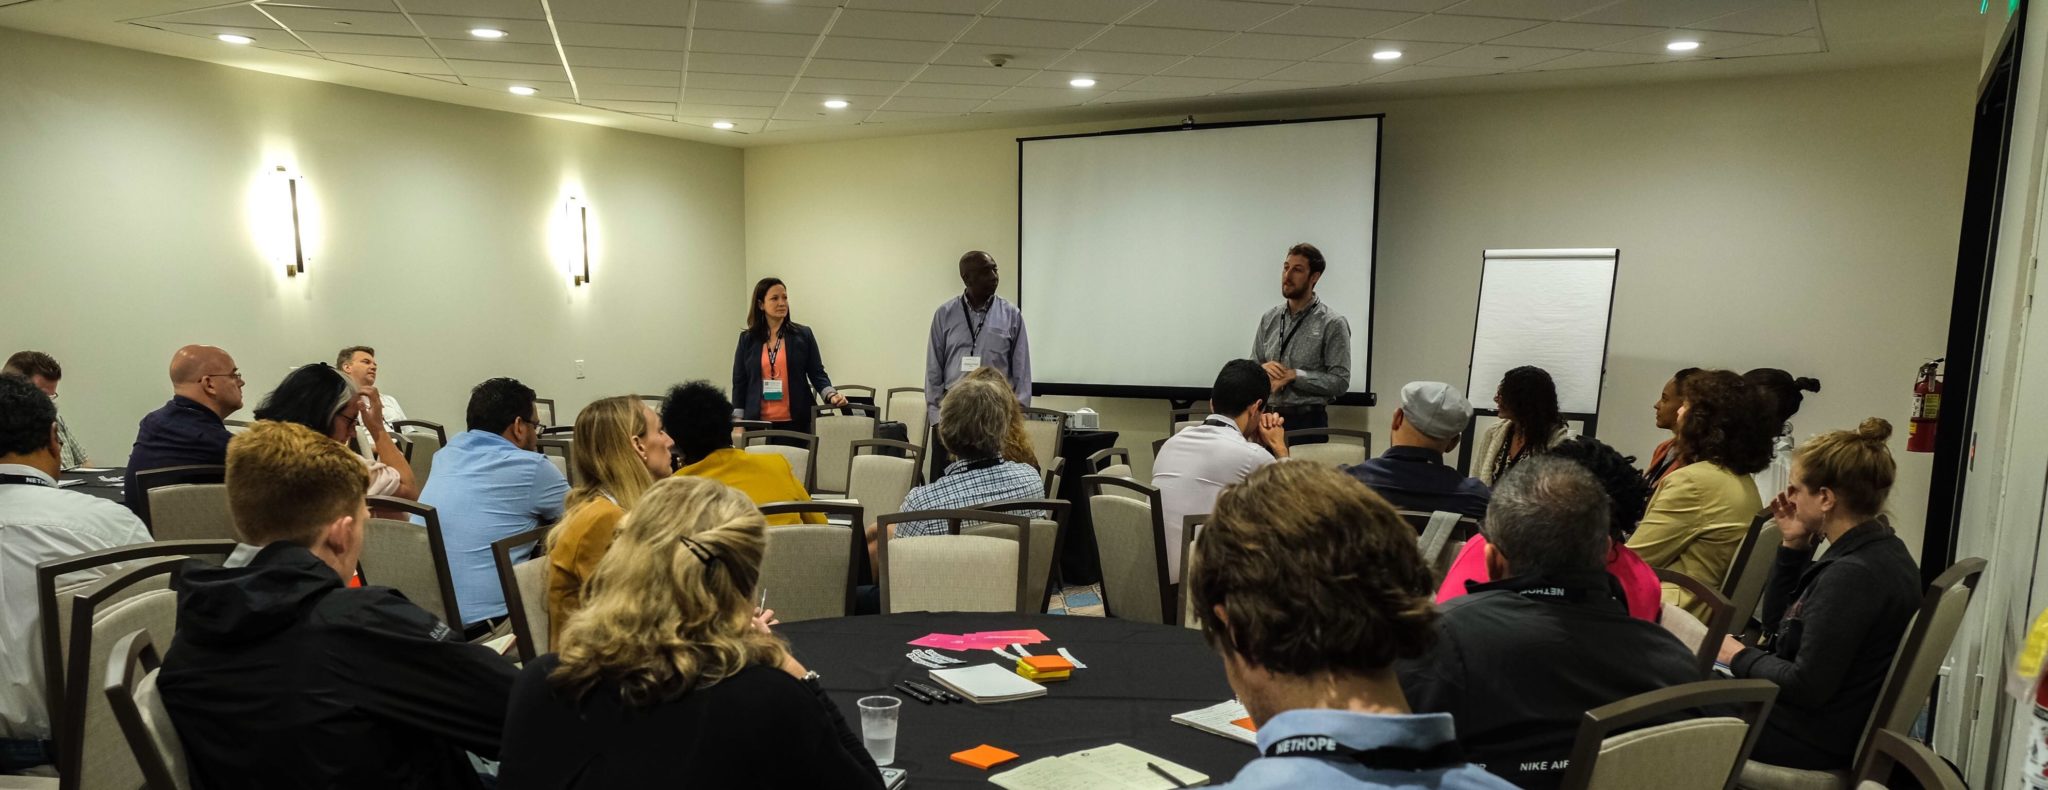 Collaboration is Key at the 2019 NetHope Global Summit